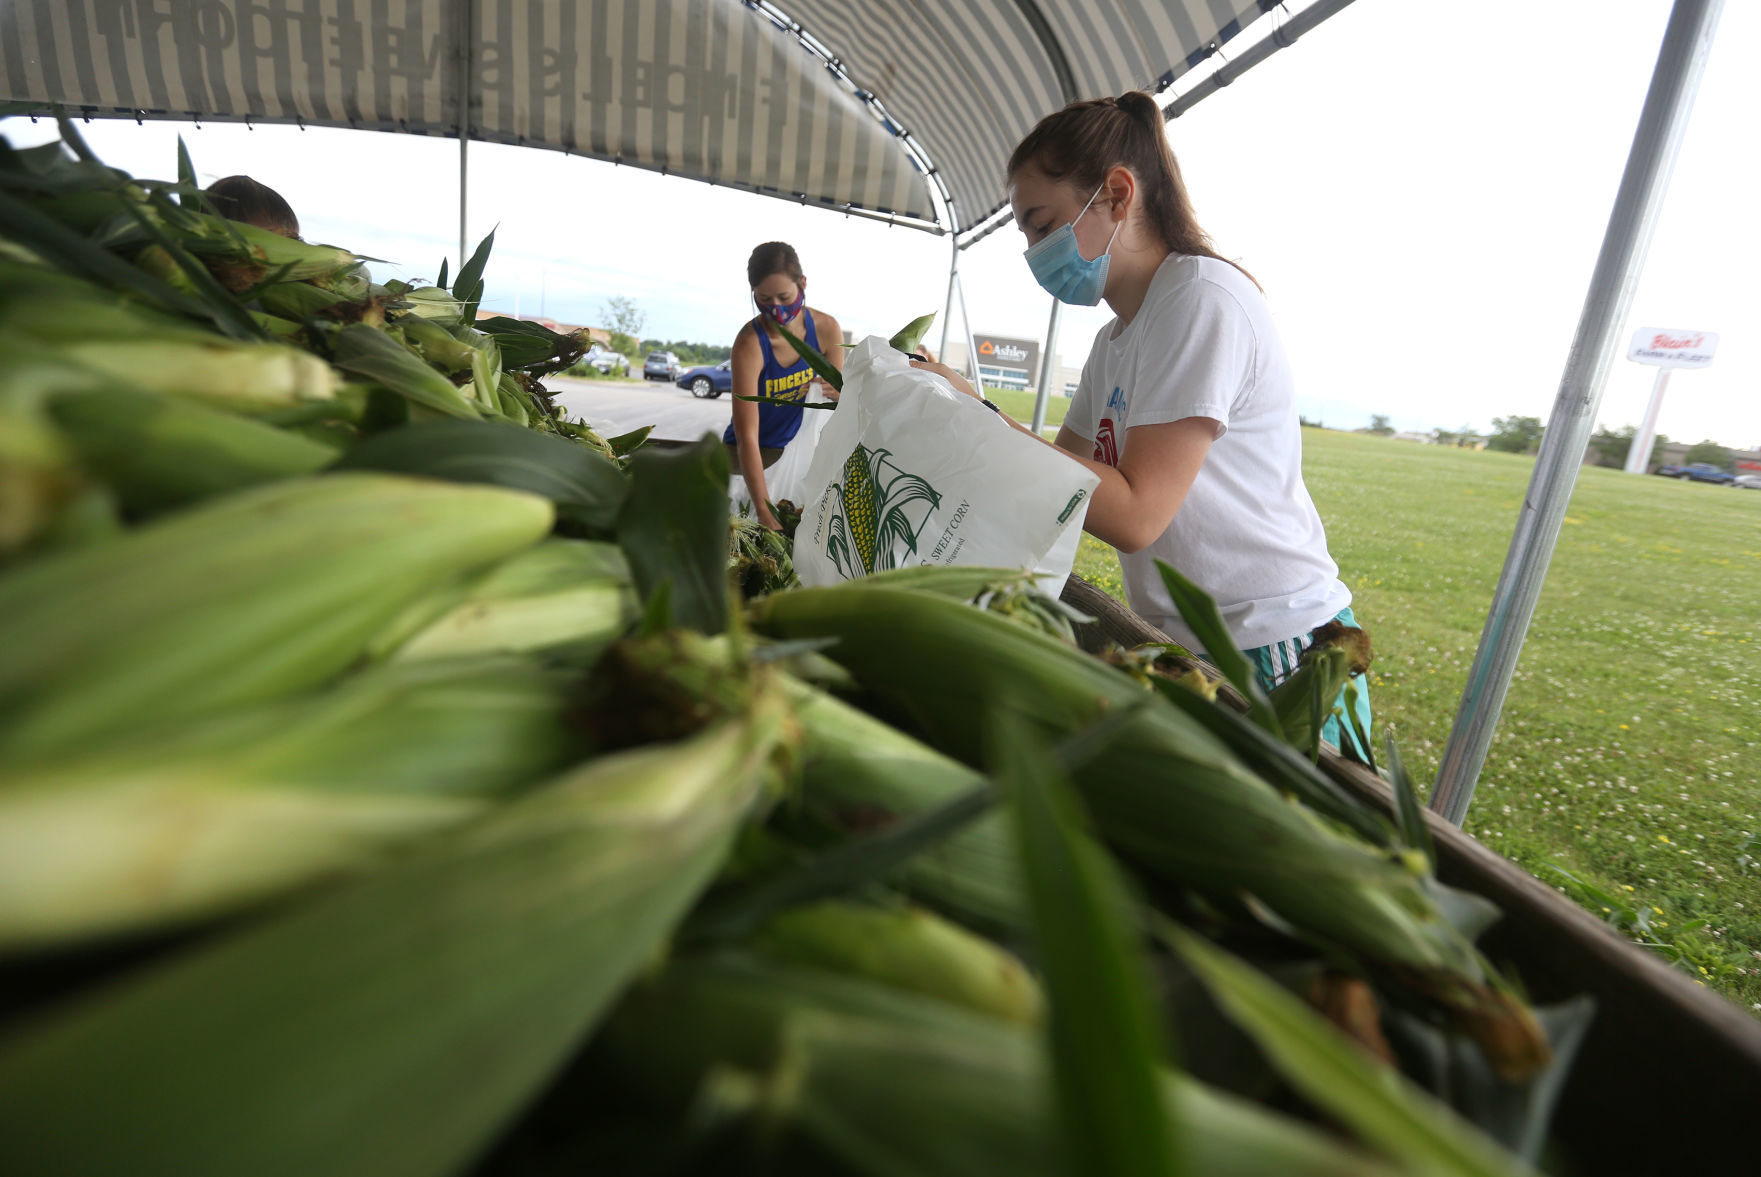 Natalie Marugg (left) and Kalie Sigman bag sweet corn during opening day of Fincel